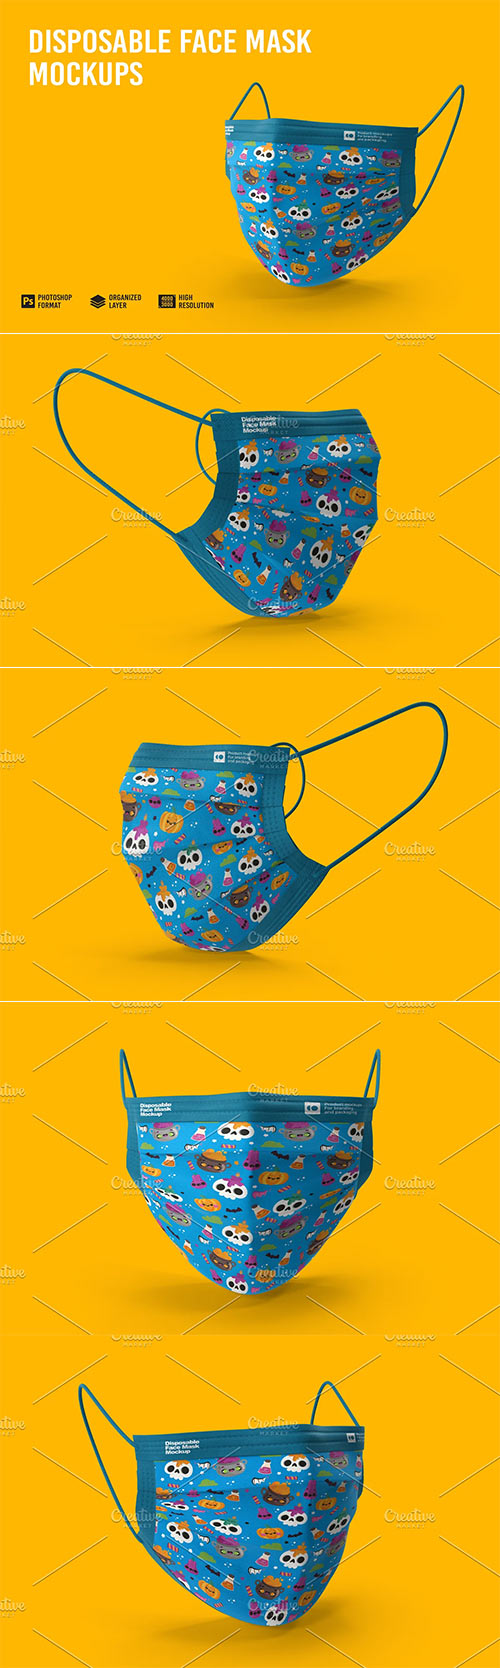 Disposable Face Mask Mockup 7150706